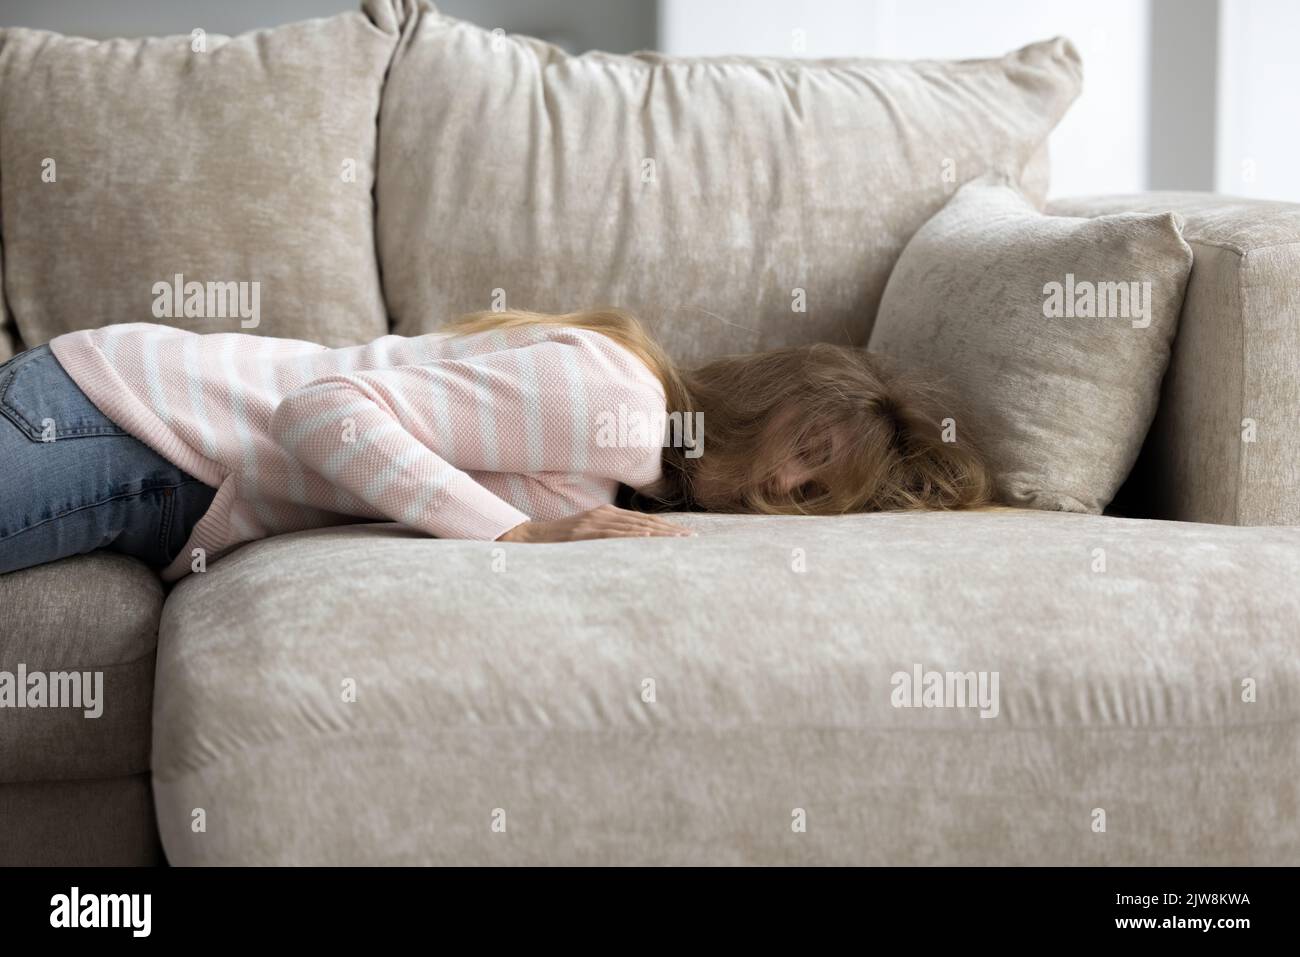 Tired exhausted sleepy young woman lying on belly on couch Stock Photo